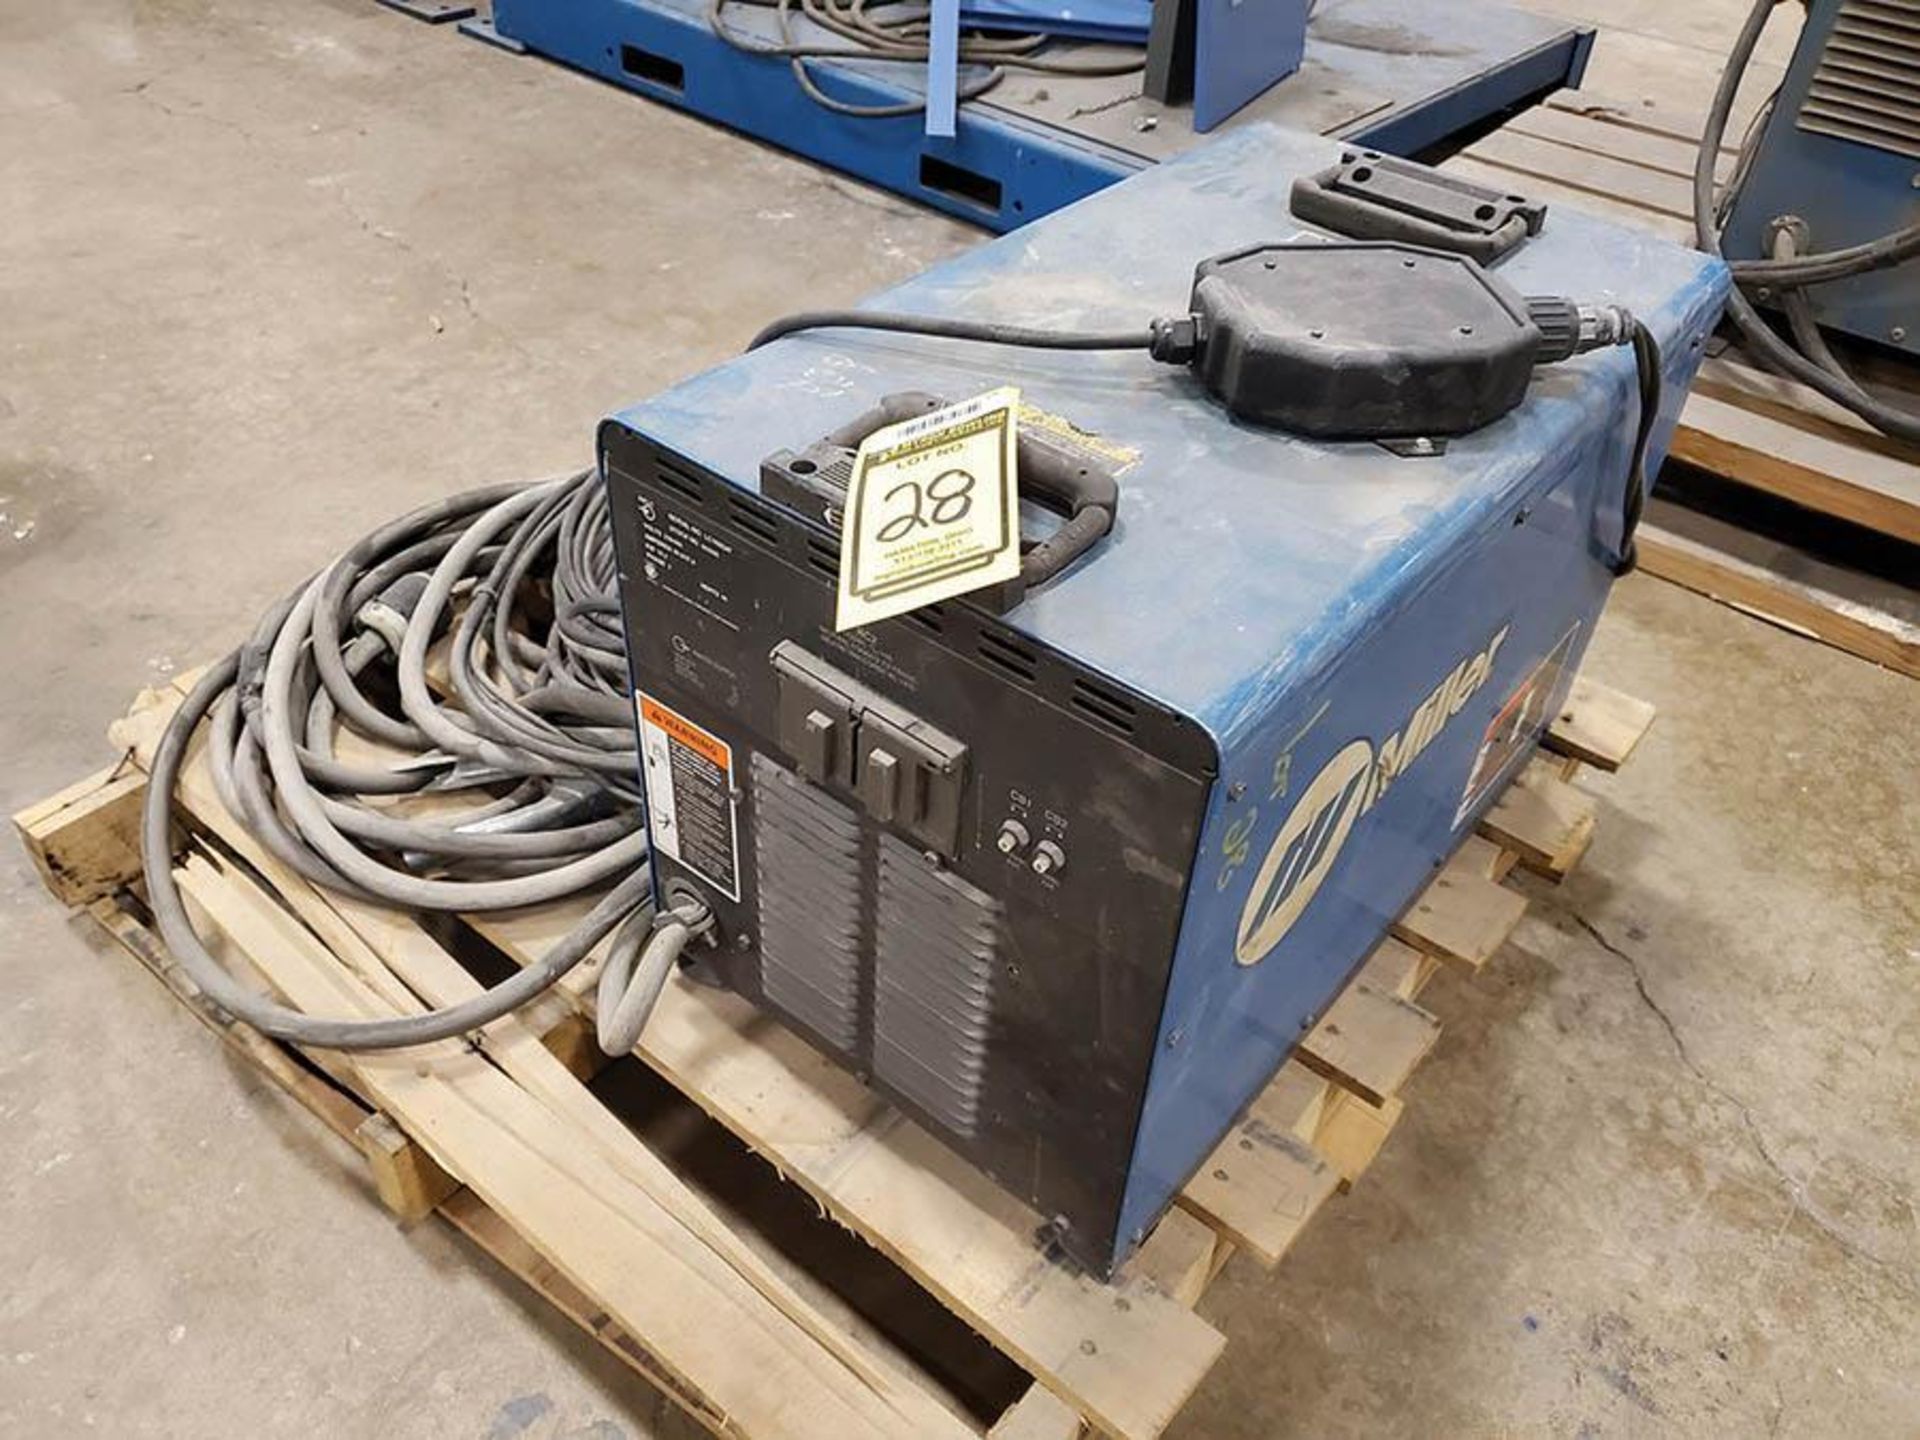 MILLER INVISION 456P DC INVERTER ARC WELDER WITH HOSE AND HEAD - Image 5 of 5